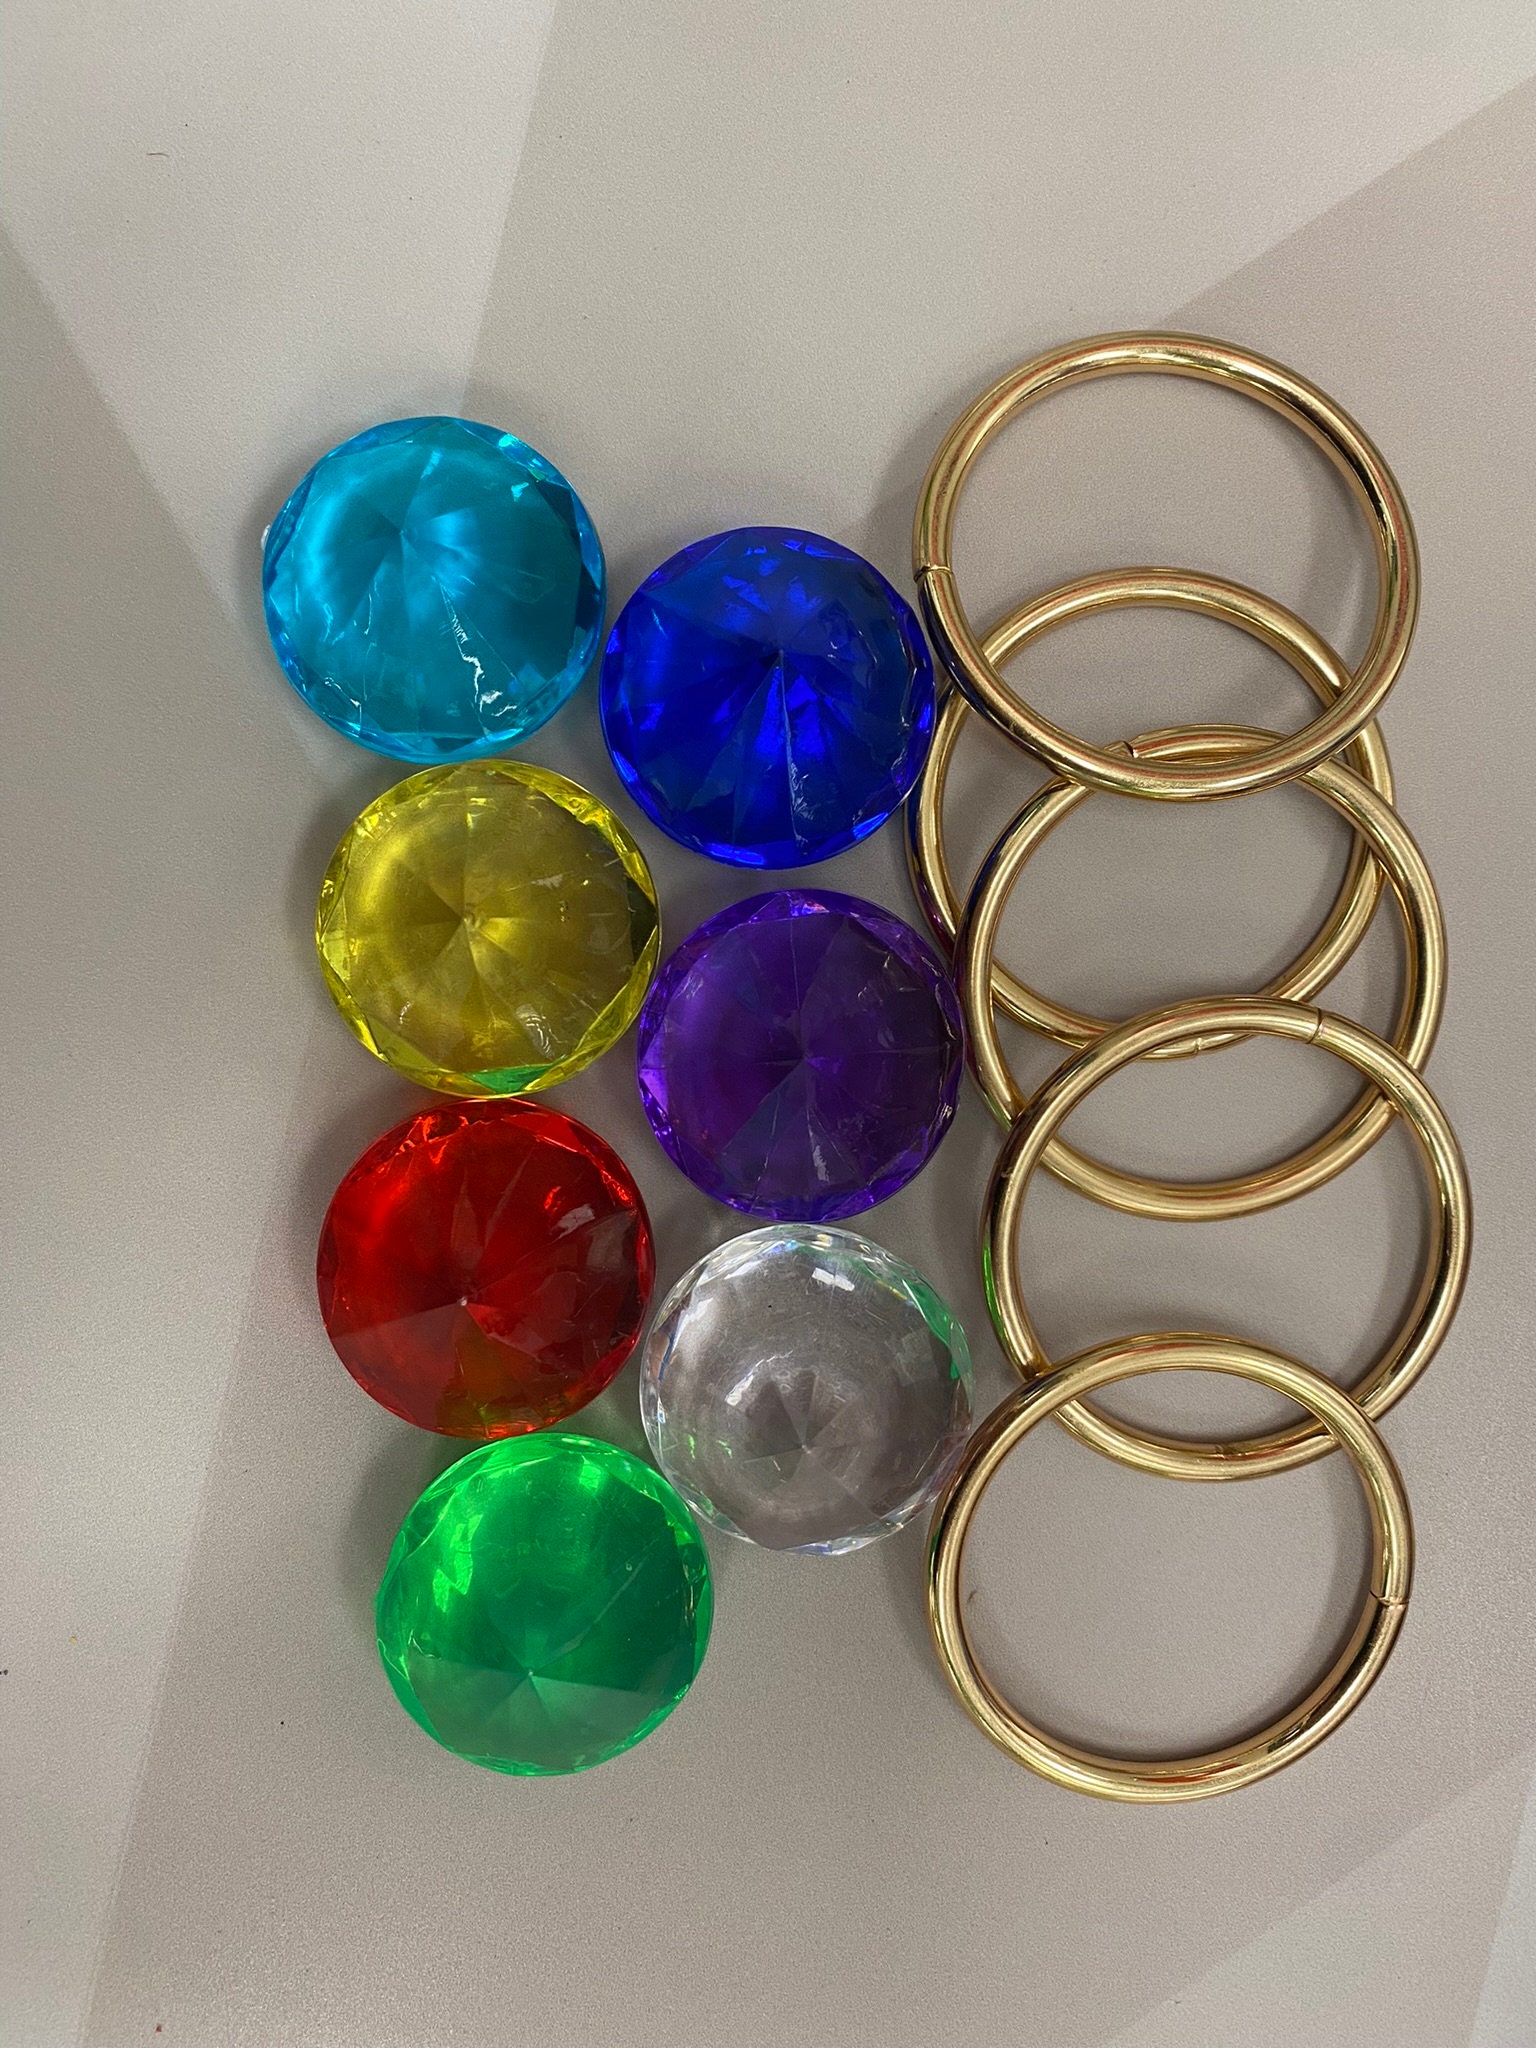 Sonic The Hedgehog 7 Large Chaos Emeralds And 5 Large Power Rings